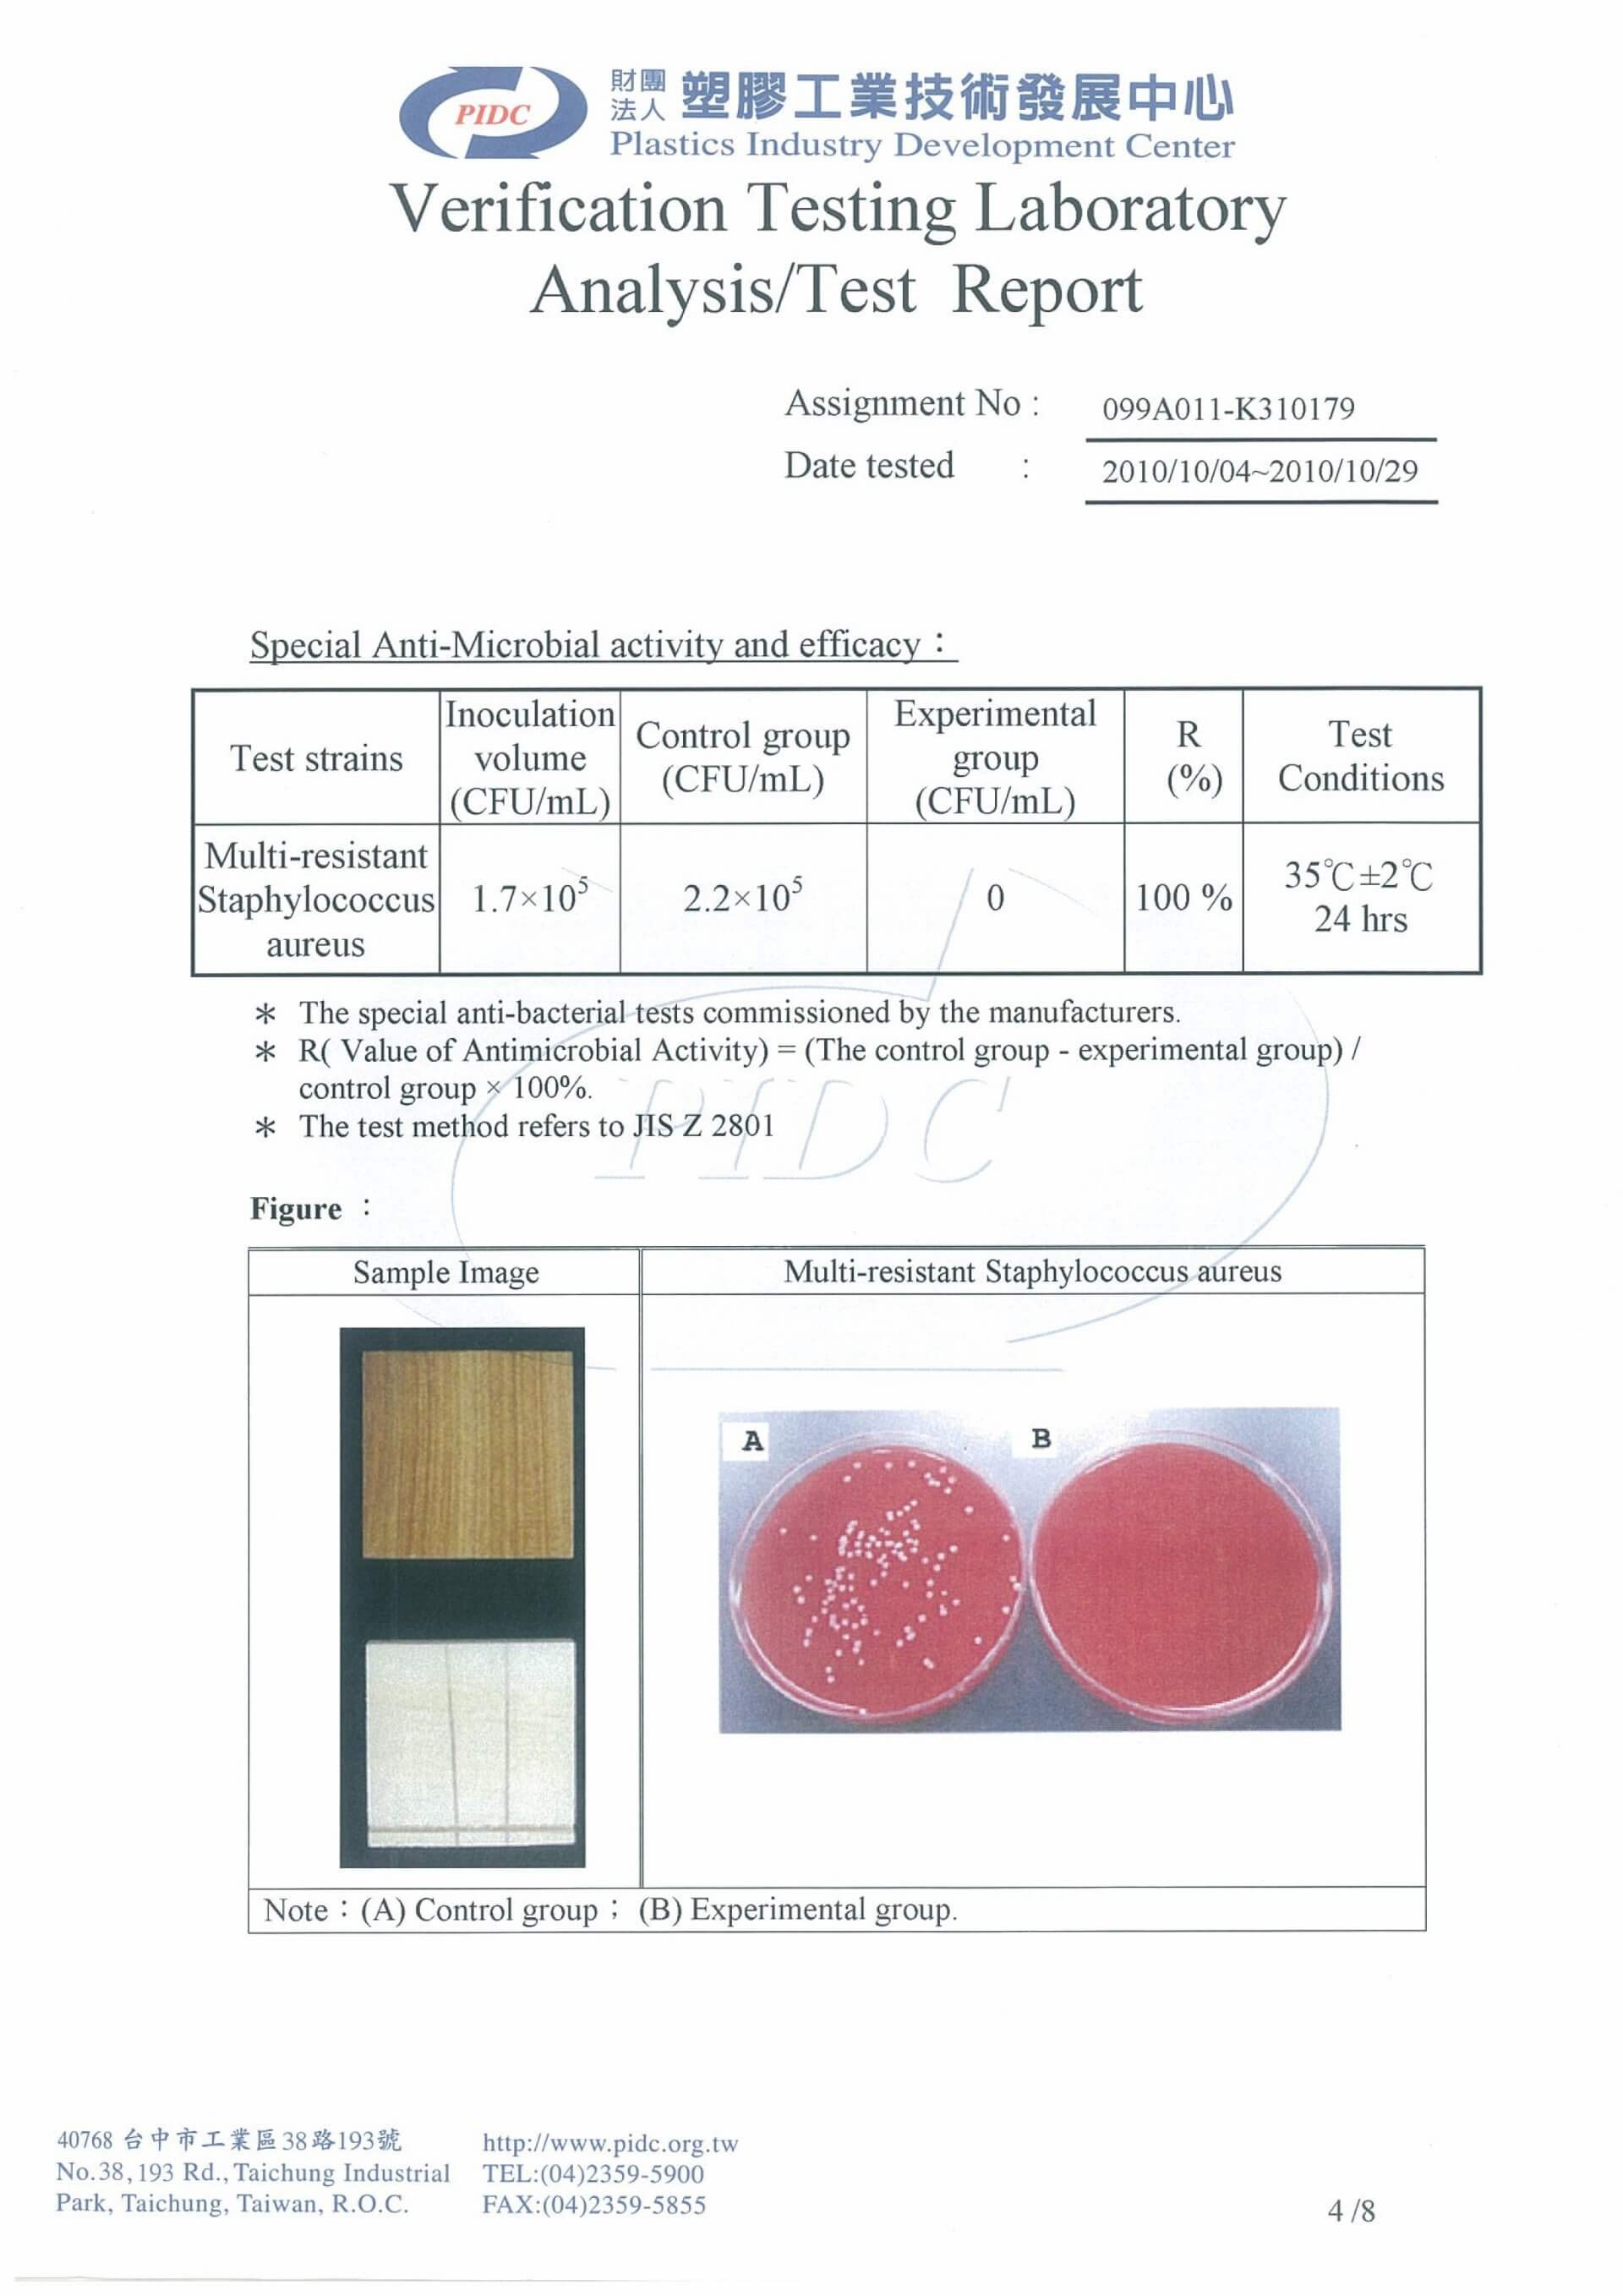 Test Report for Multi-resistant and Staphylococus-aureus